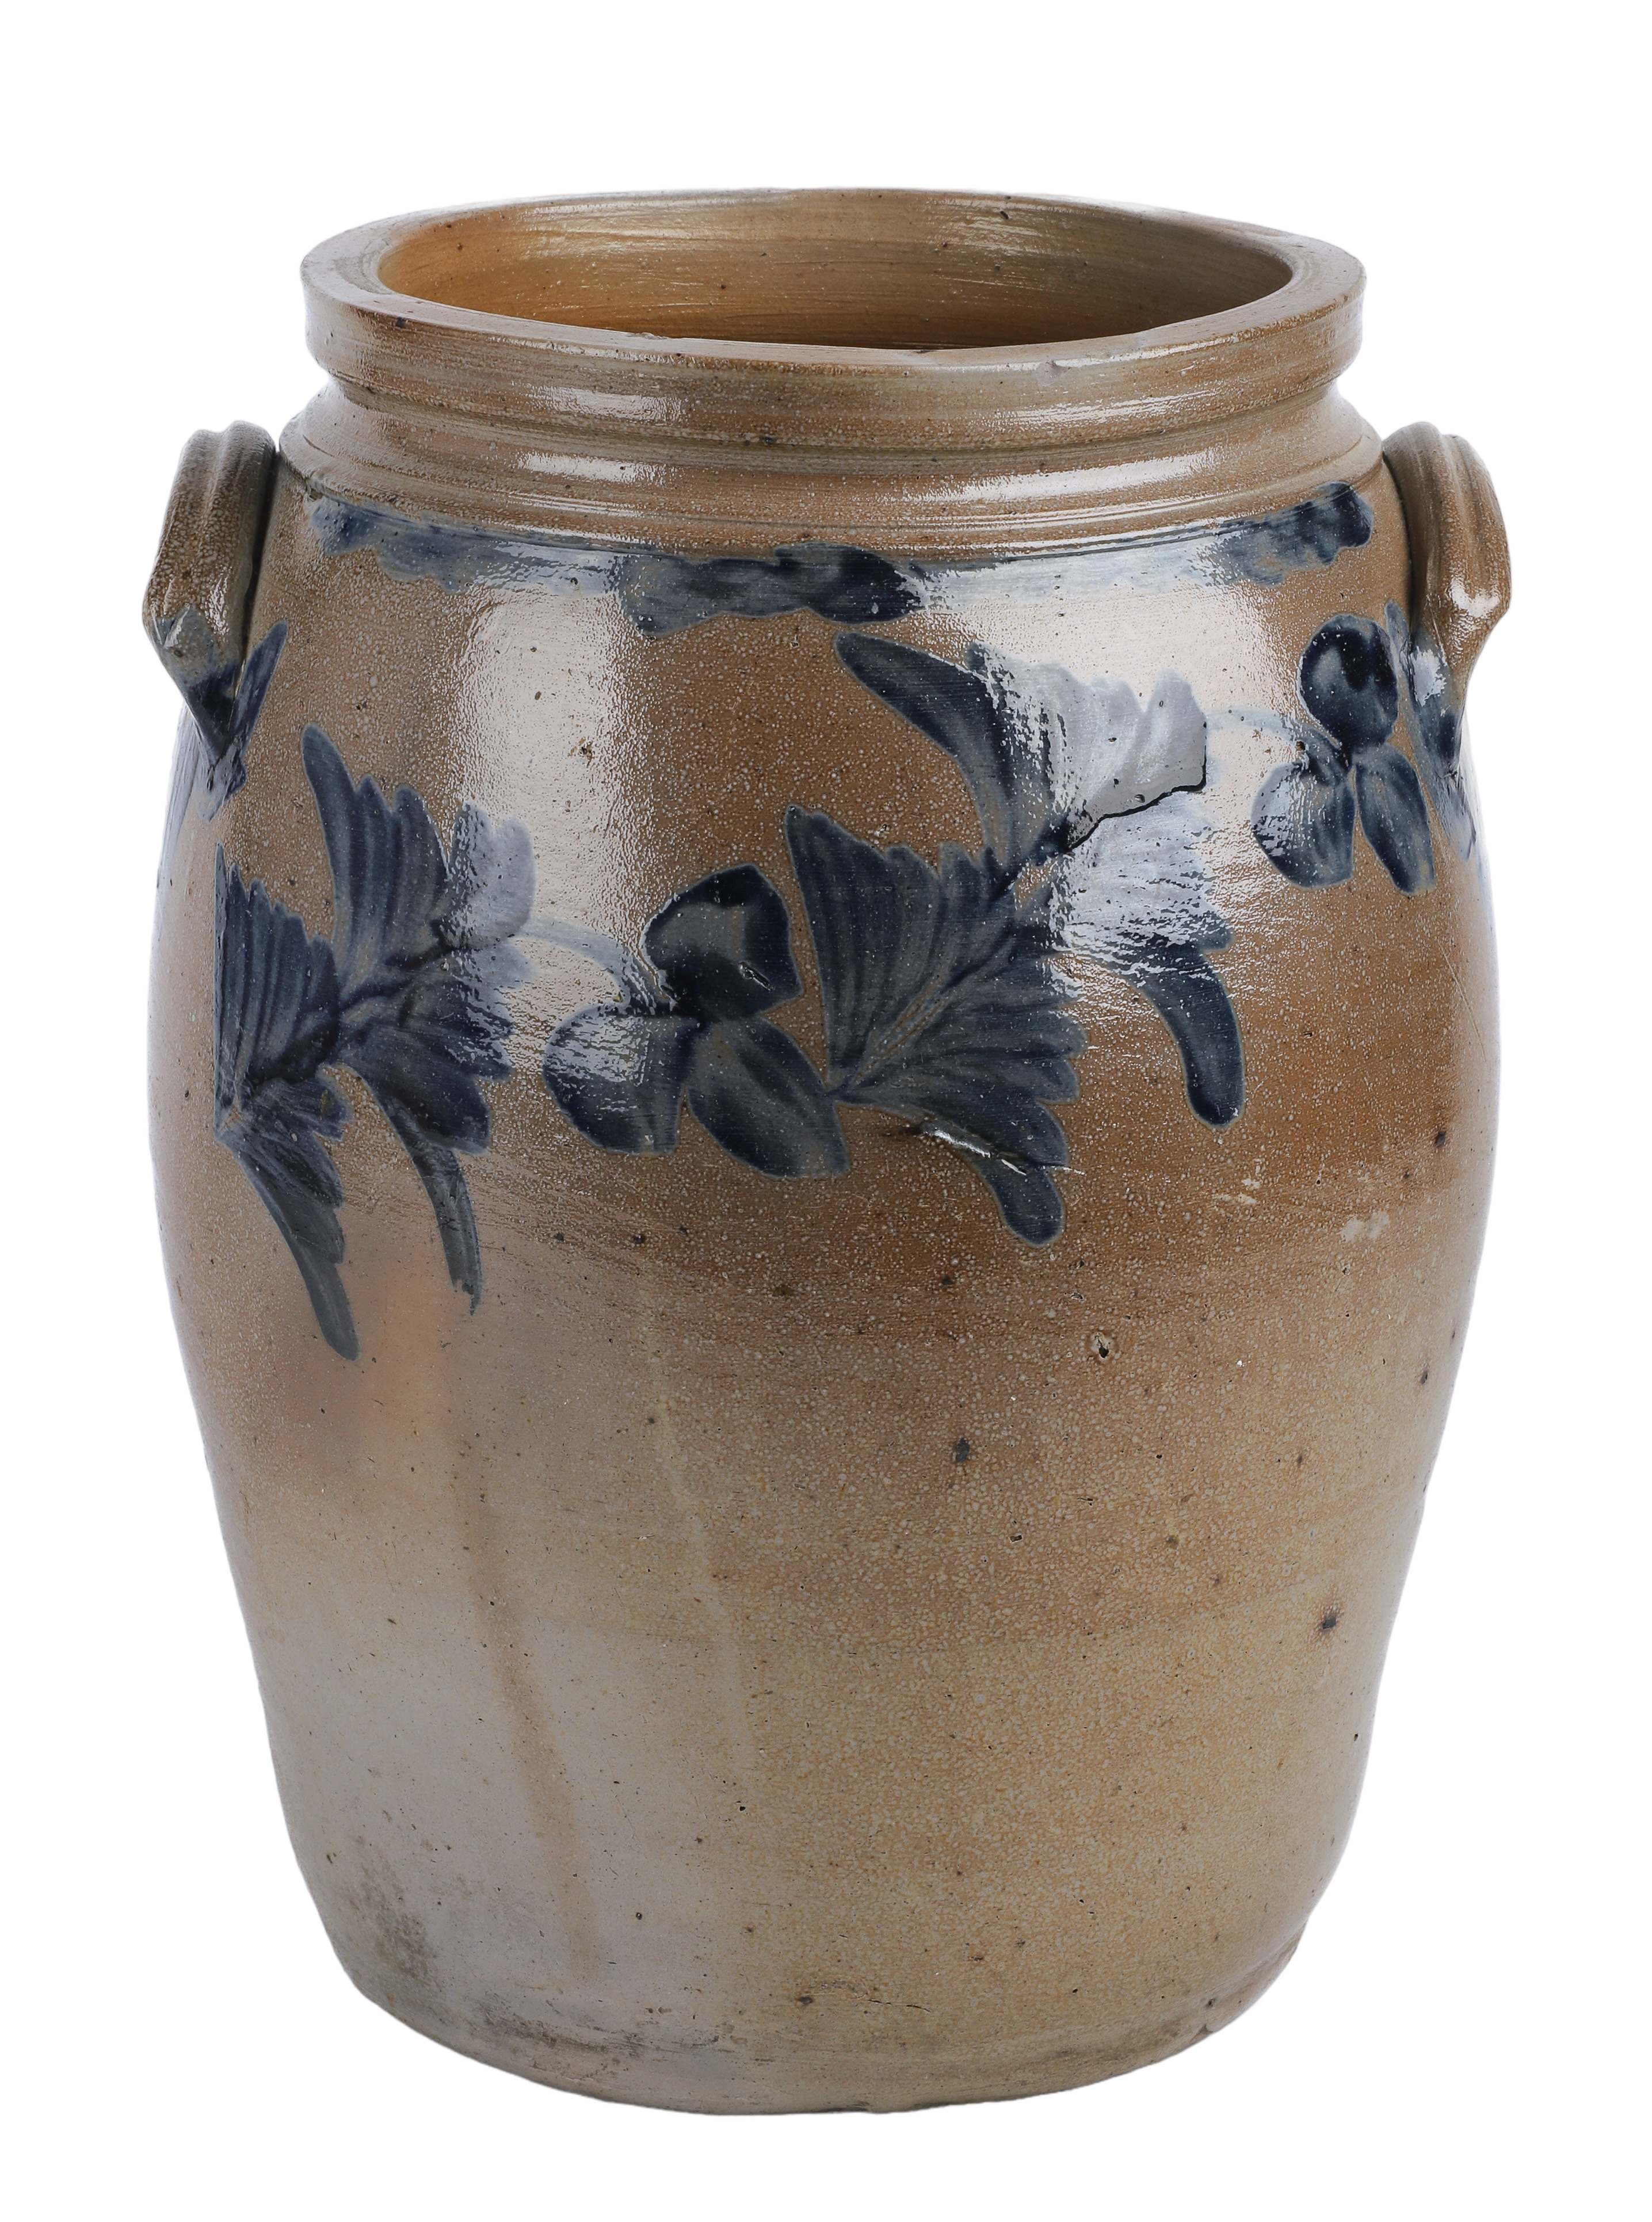 Blue decorated stoneware crock, overall